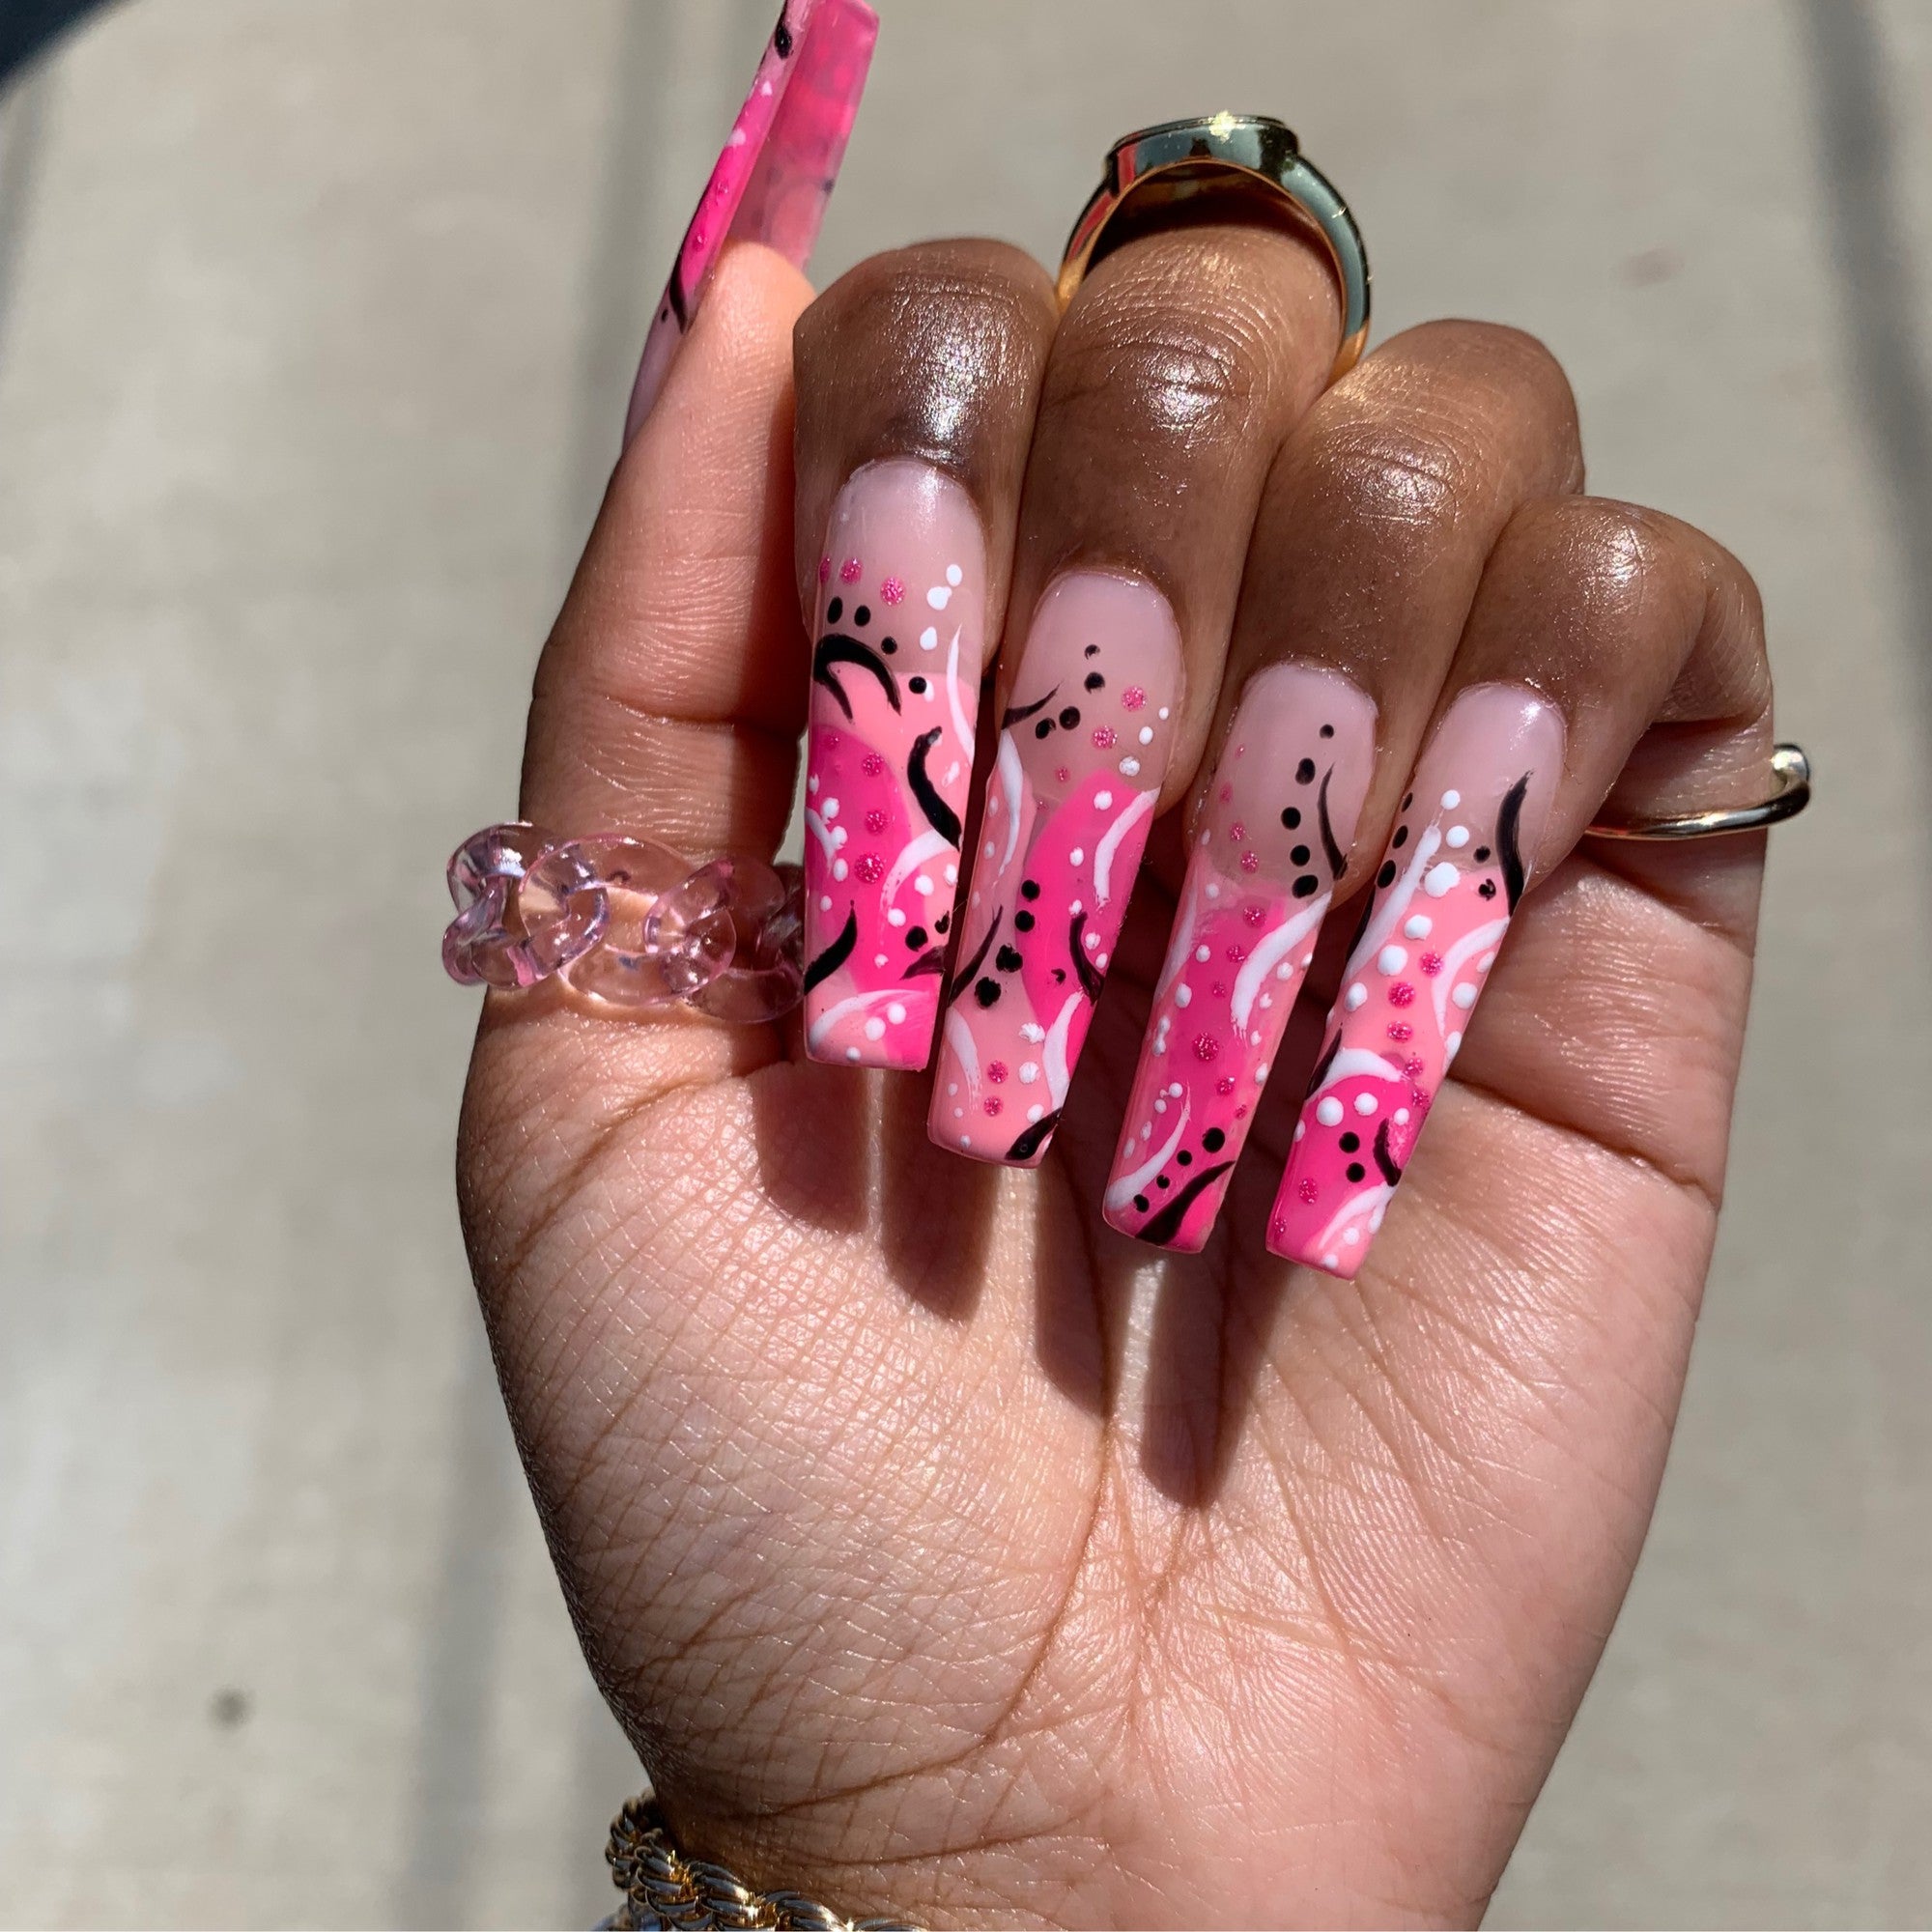 90s nails are blowing up on instagram 4 - VIVA GLAM MAGAZINE™